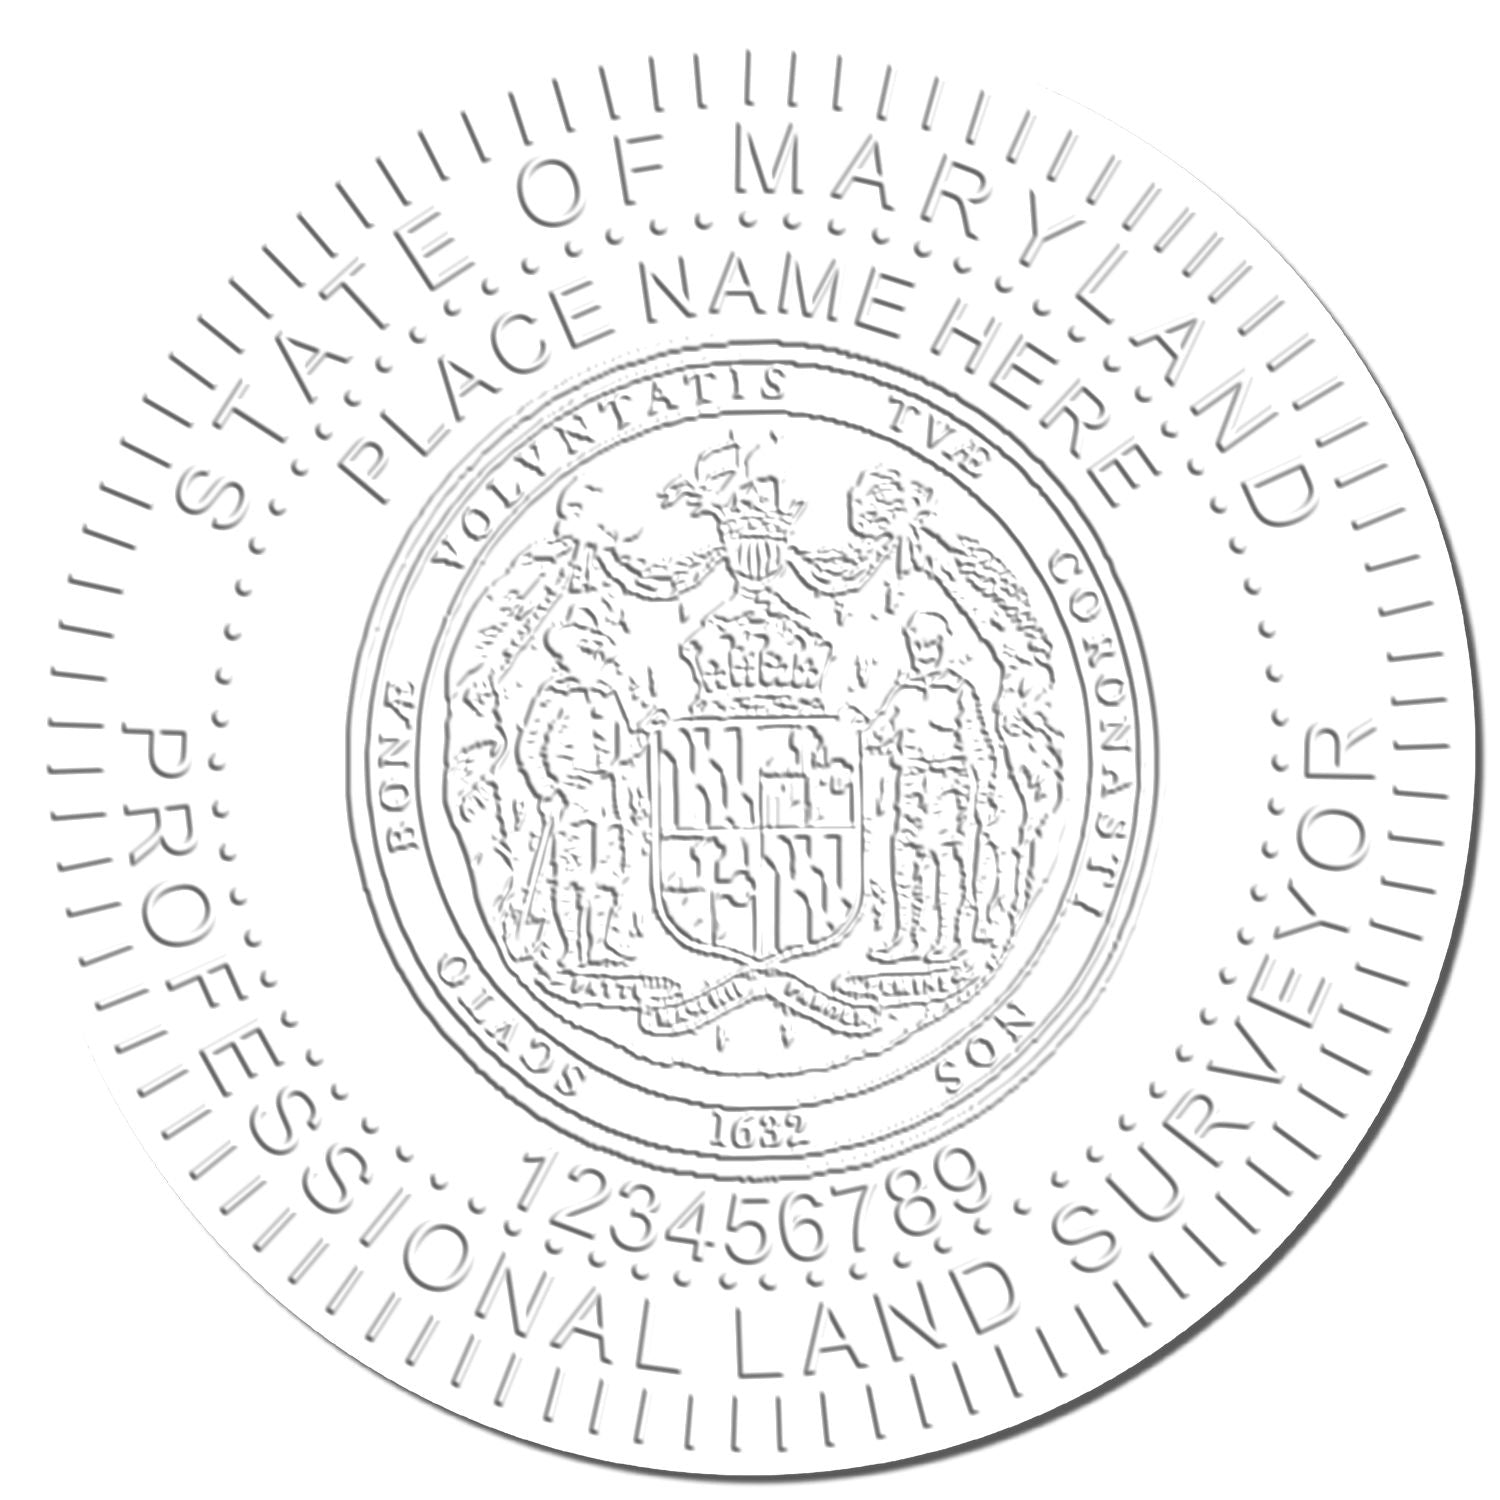 The main image for the Long Reach Maryland Land Surveyor Seal depicting a sample of the imprint and electronic files